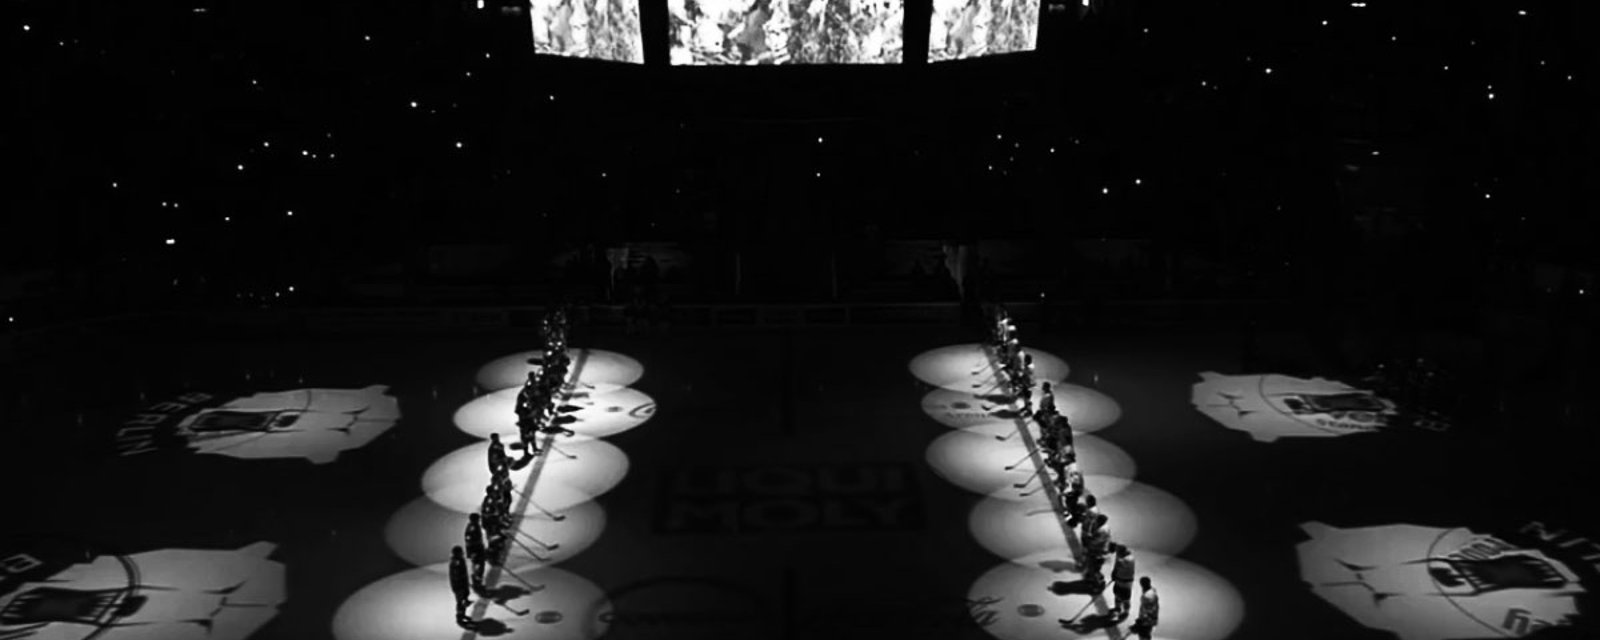 Video: The Eisbären Berlin played their first home game after the terror attack on monday.